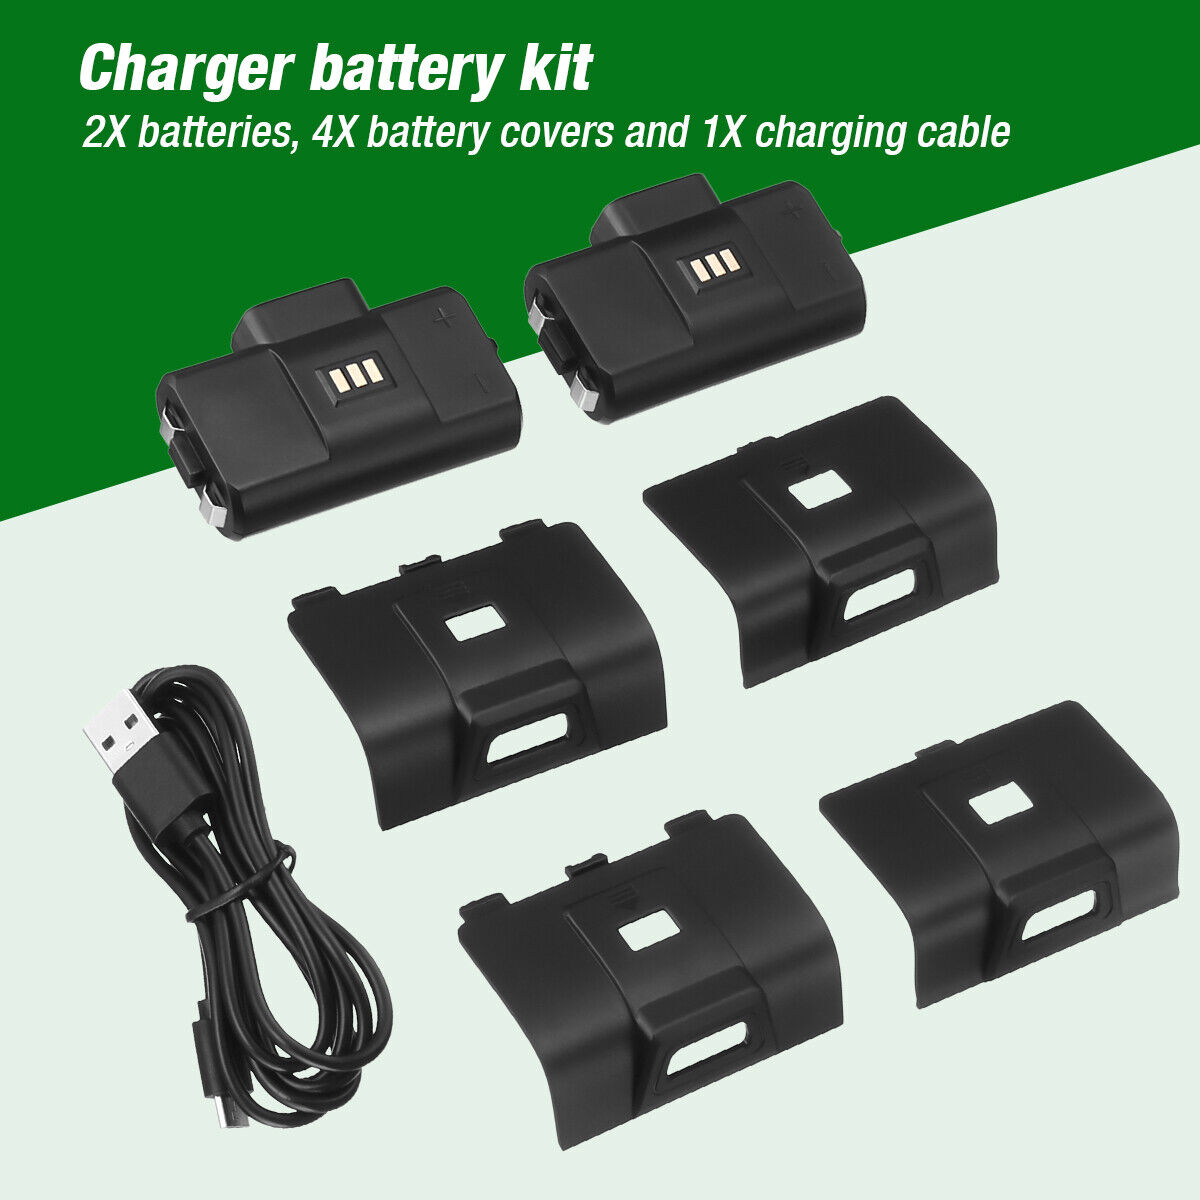 Rechargeable Battery Pack For XBox One X/S Series X/S Controller & Charger Cable EBL Does not apply - фотография #4